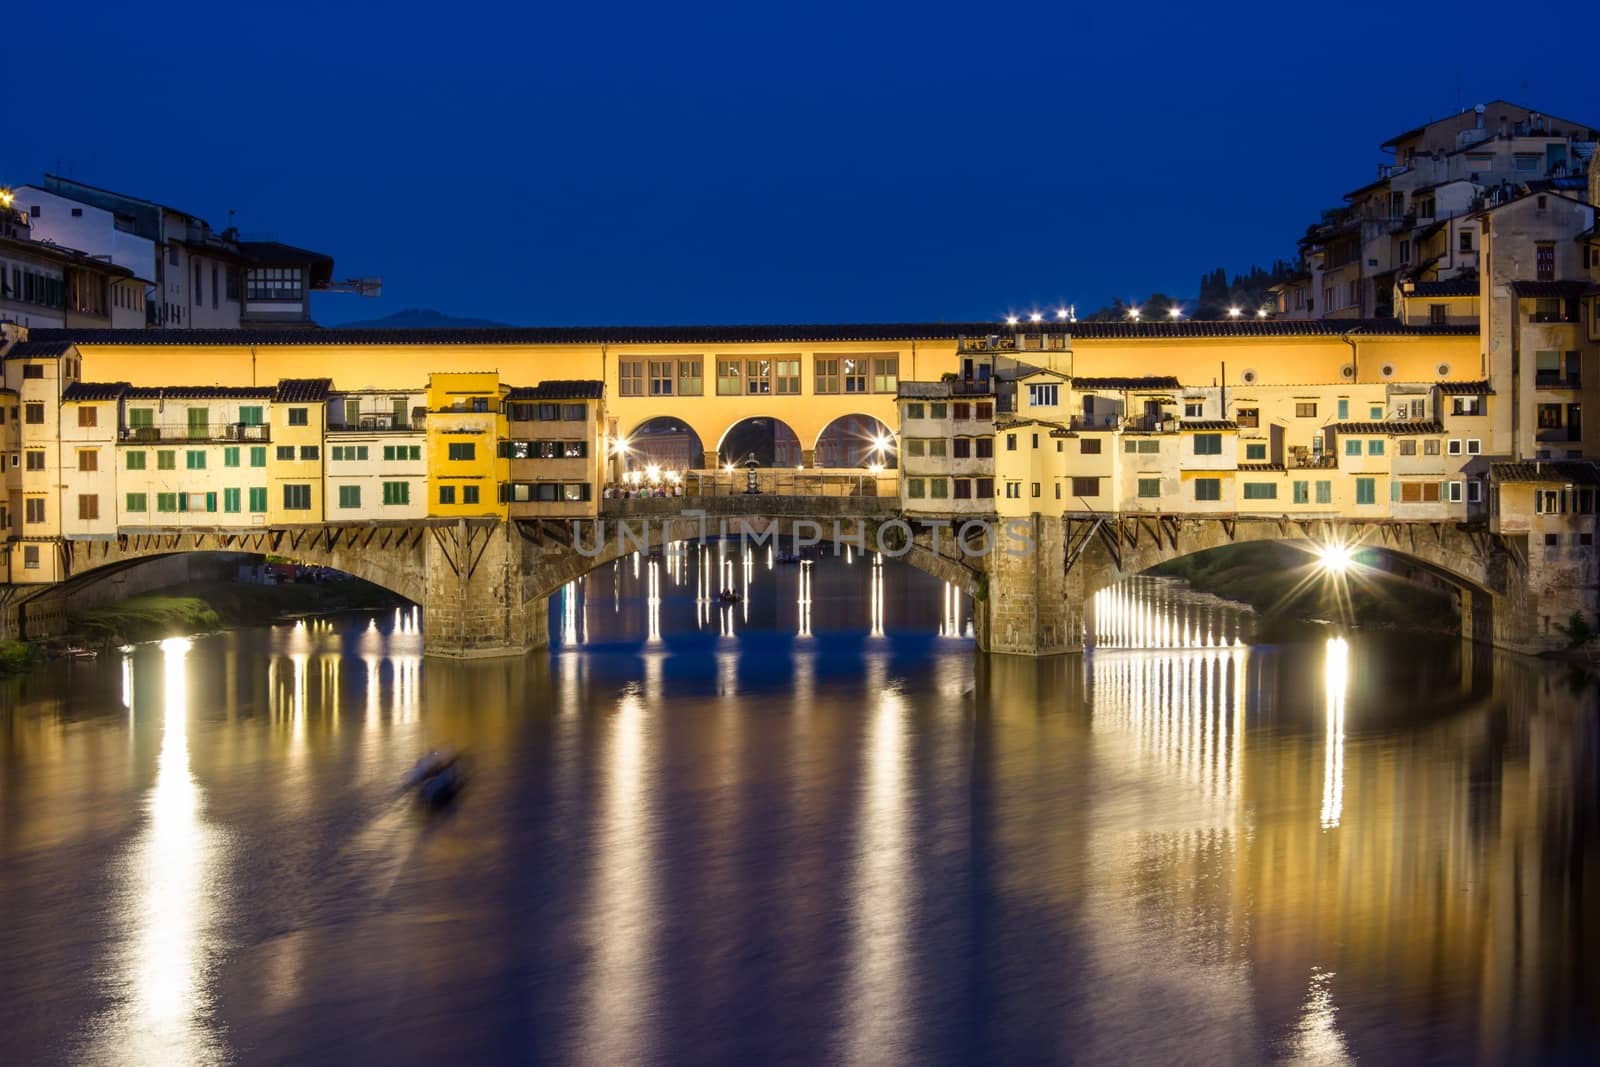 Old Bridge, the most famous bridge in Florence, Tuscany